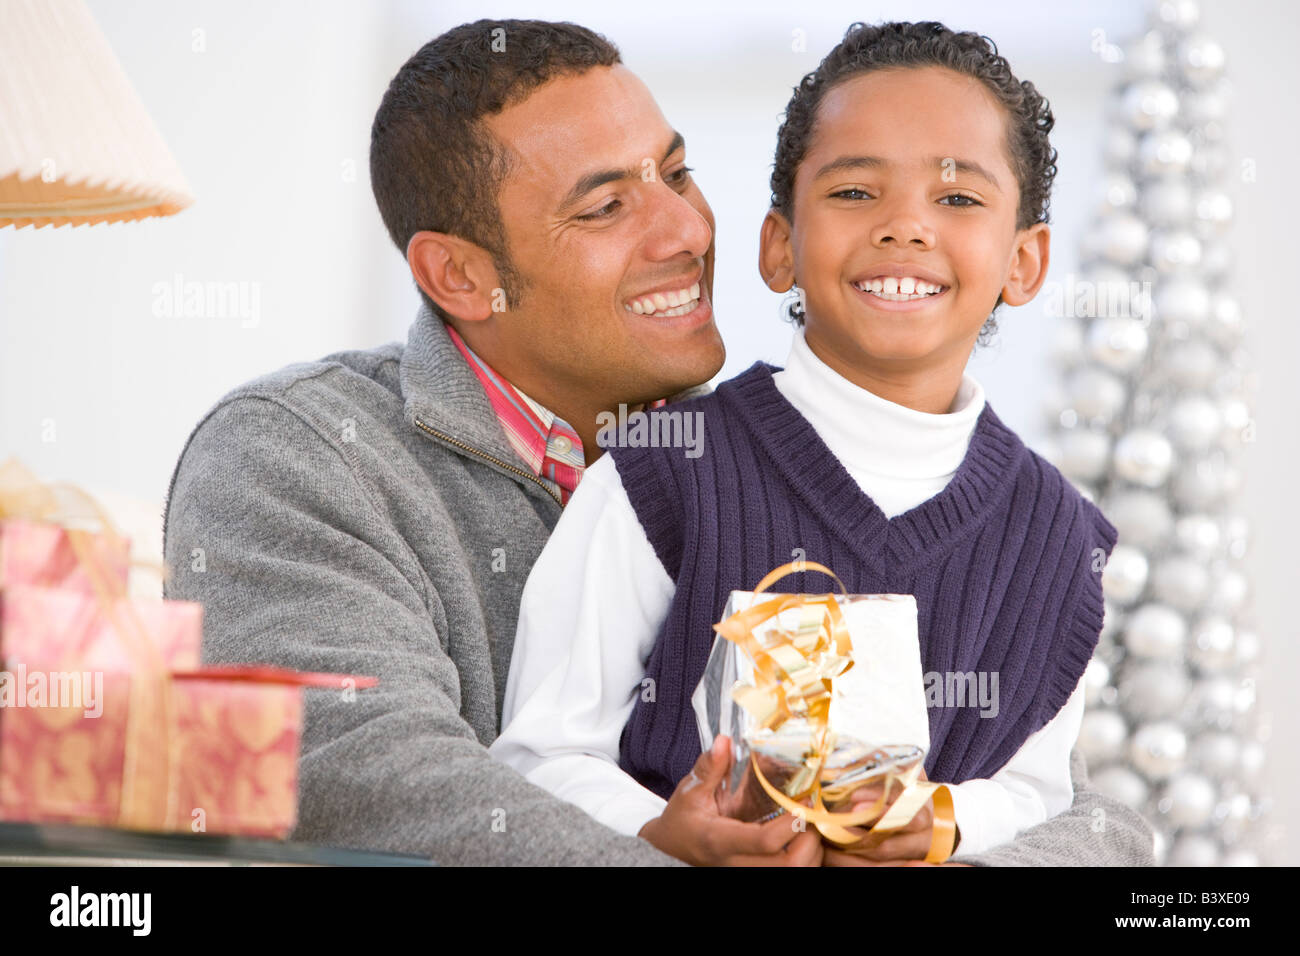 Father And Son Hugging, Holding Christmas Gift Stock Photo